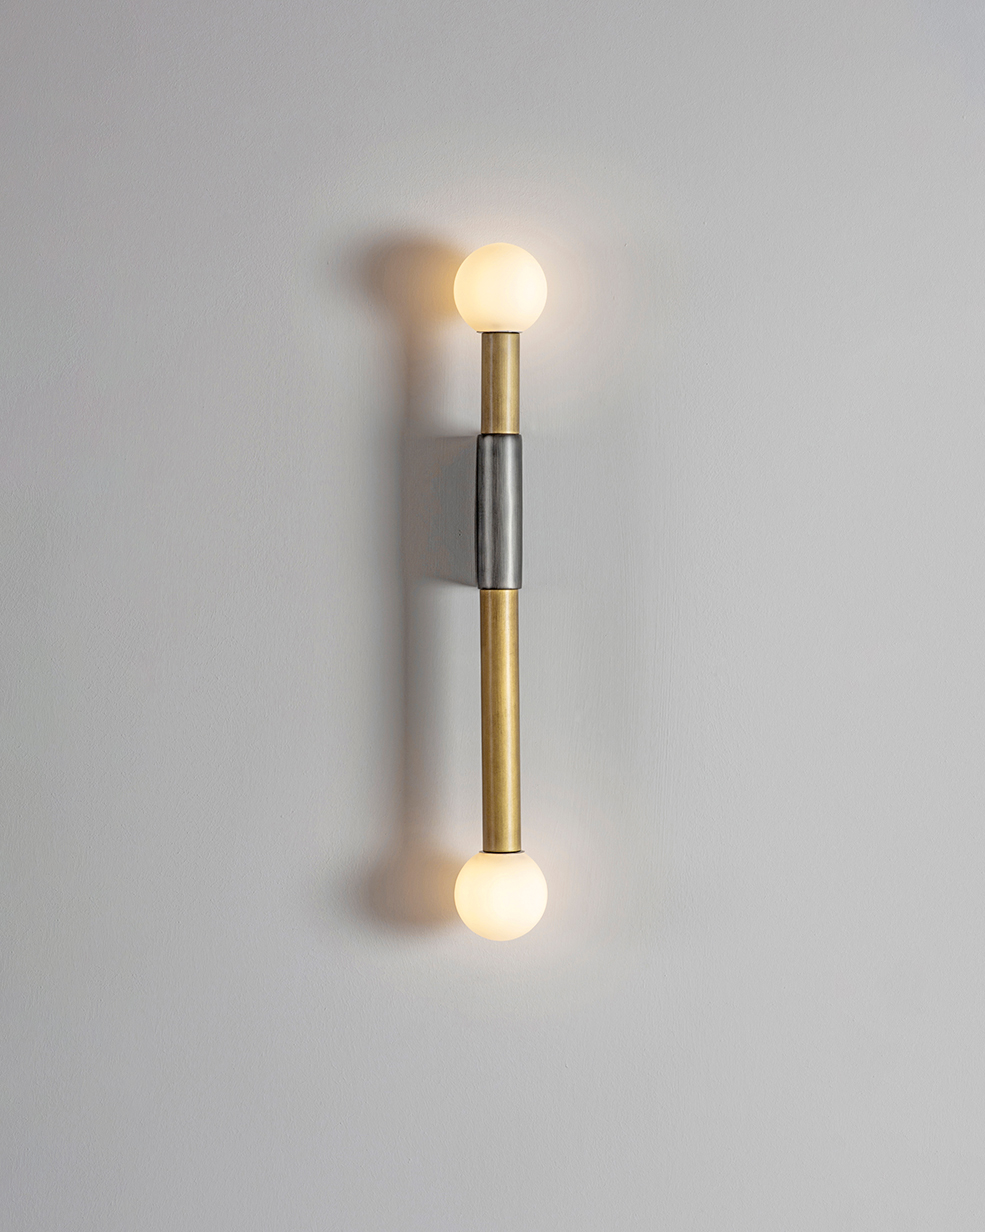 Square in Circle_Pole and Circle Wall Light_Lighting_Studio Fenice_3